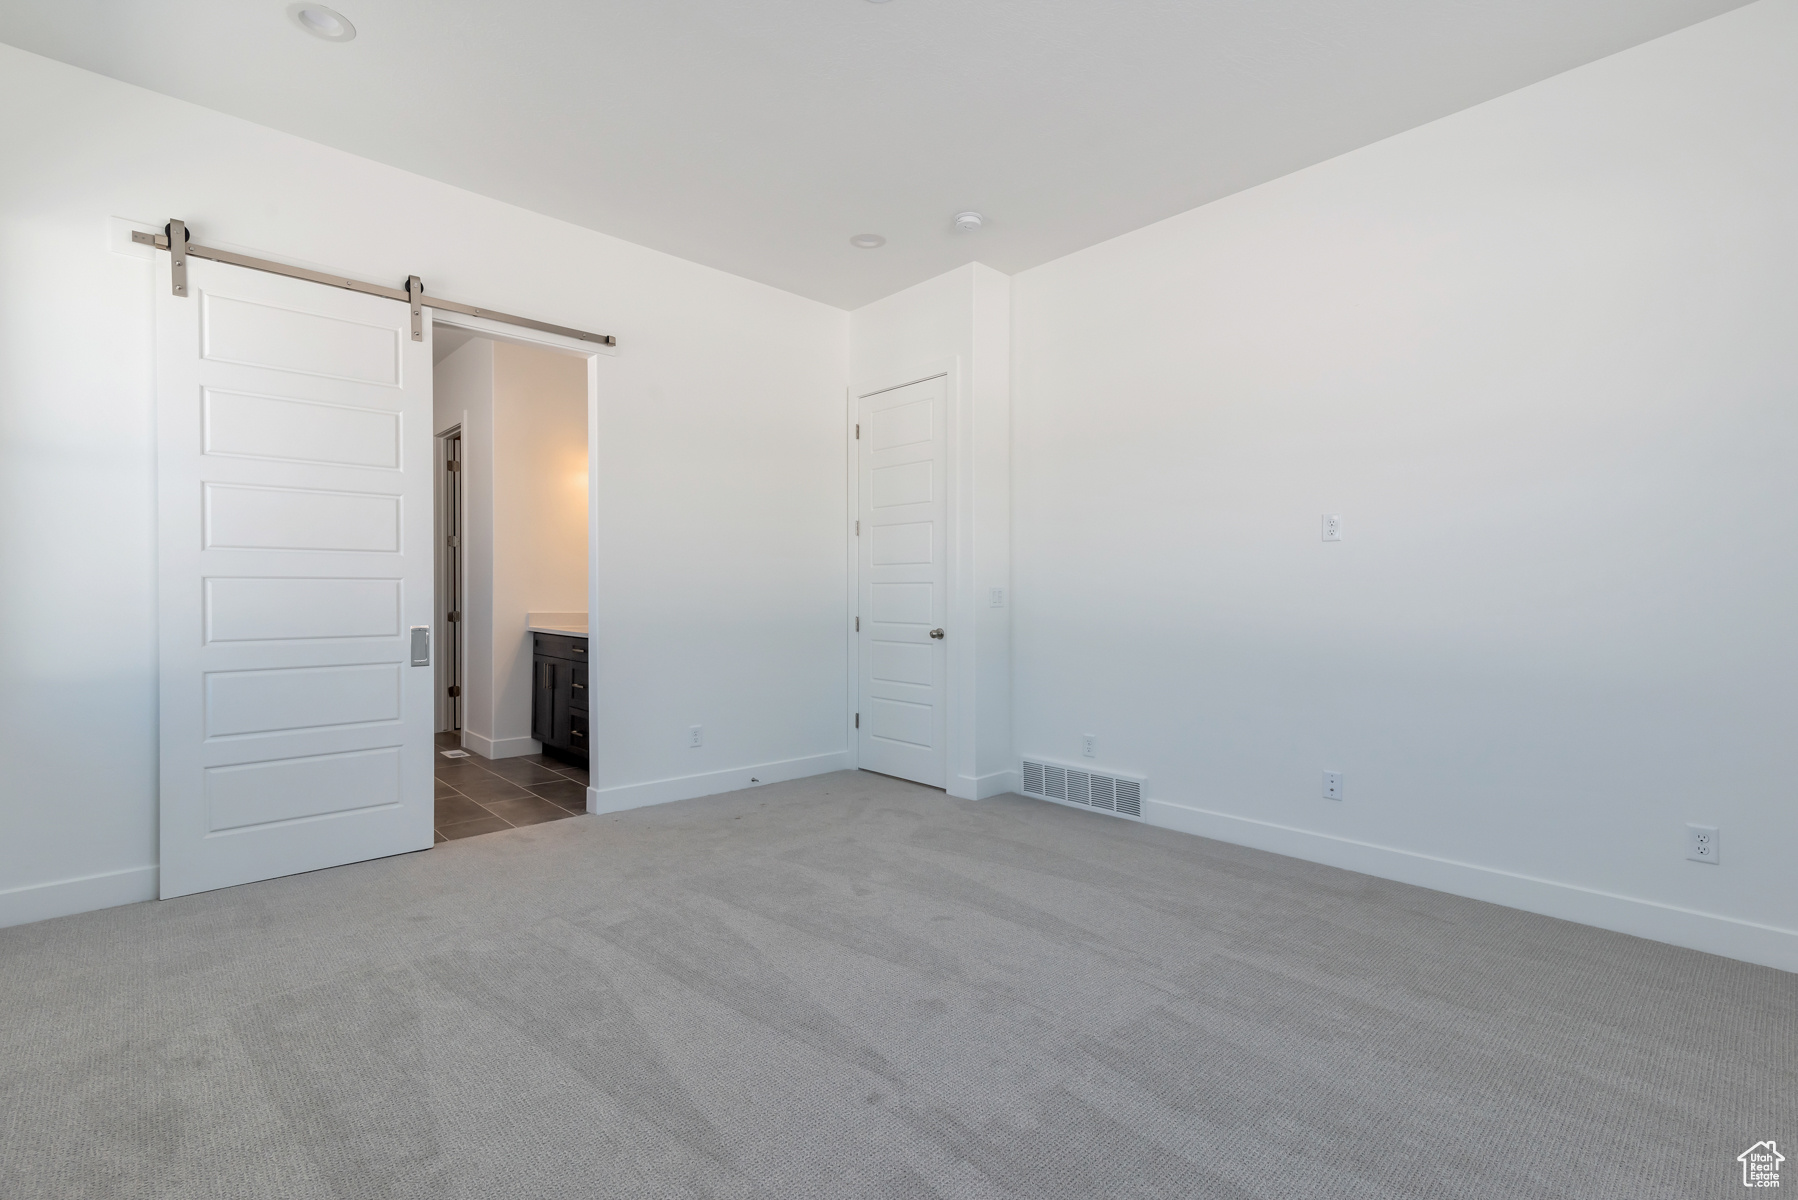 Unfurnished bedroom with a barn door, connected bathroom, and dark carpet